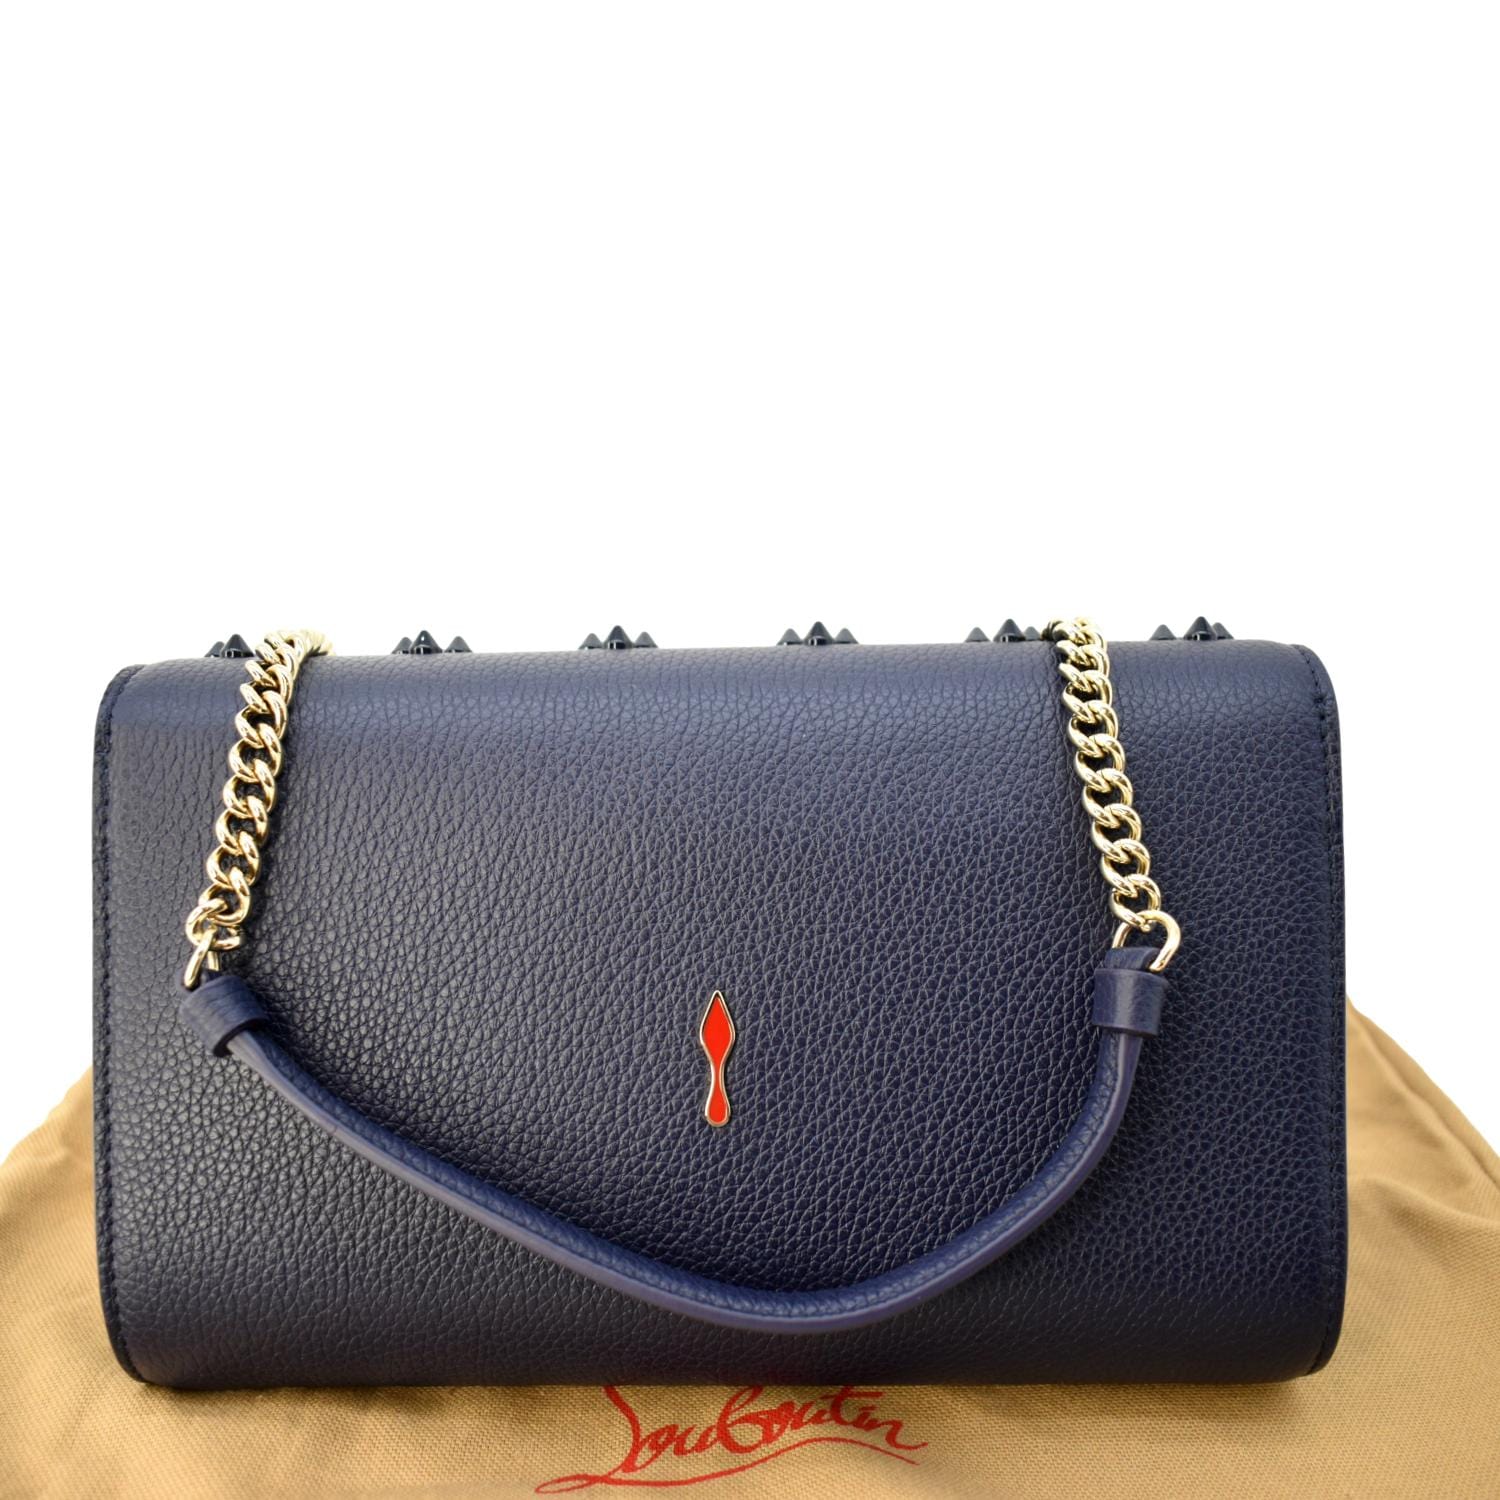 Bags collection for women - Christian Louboutin